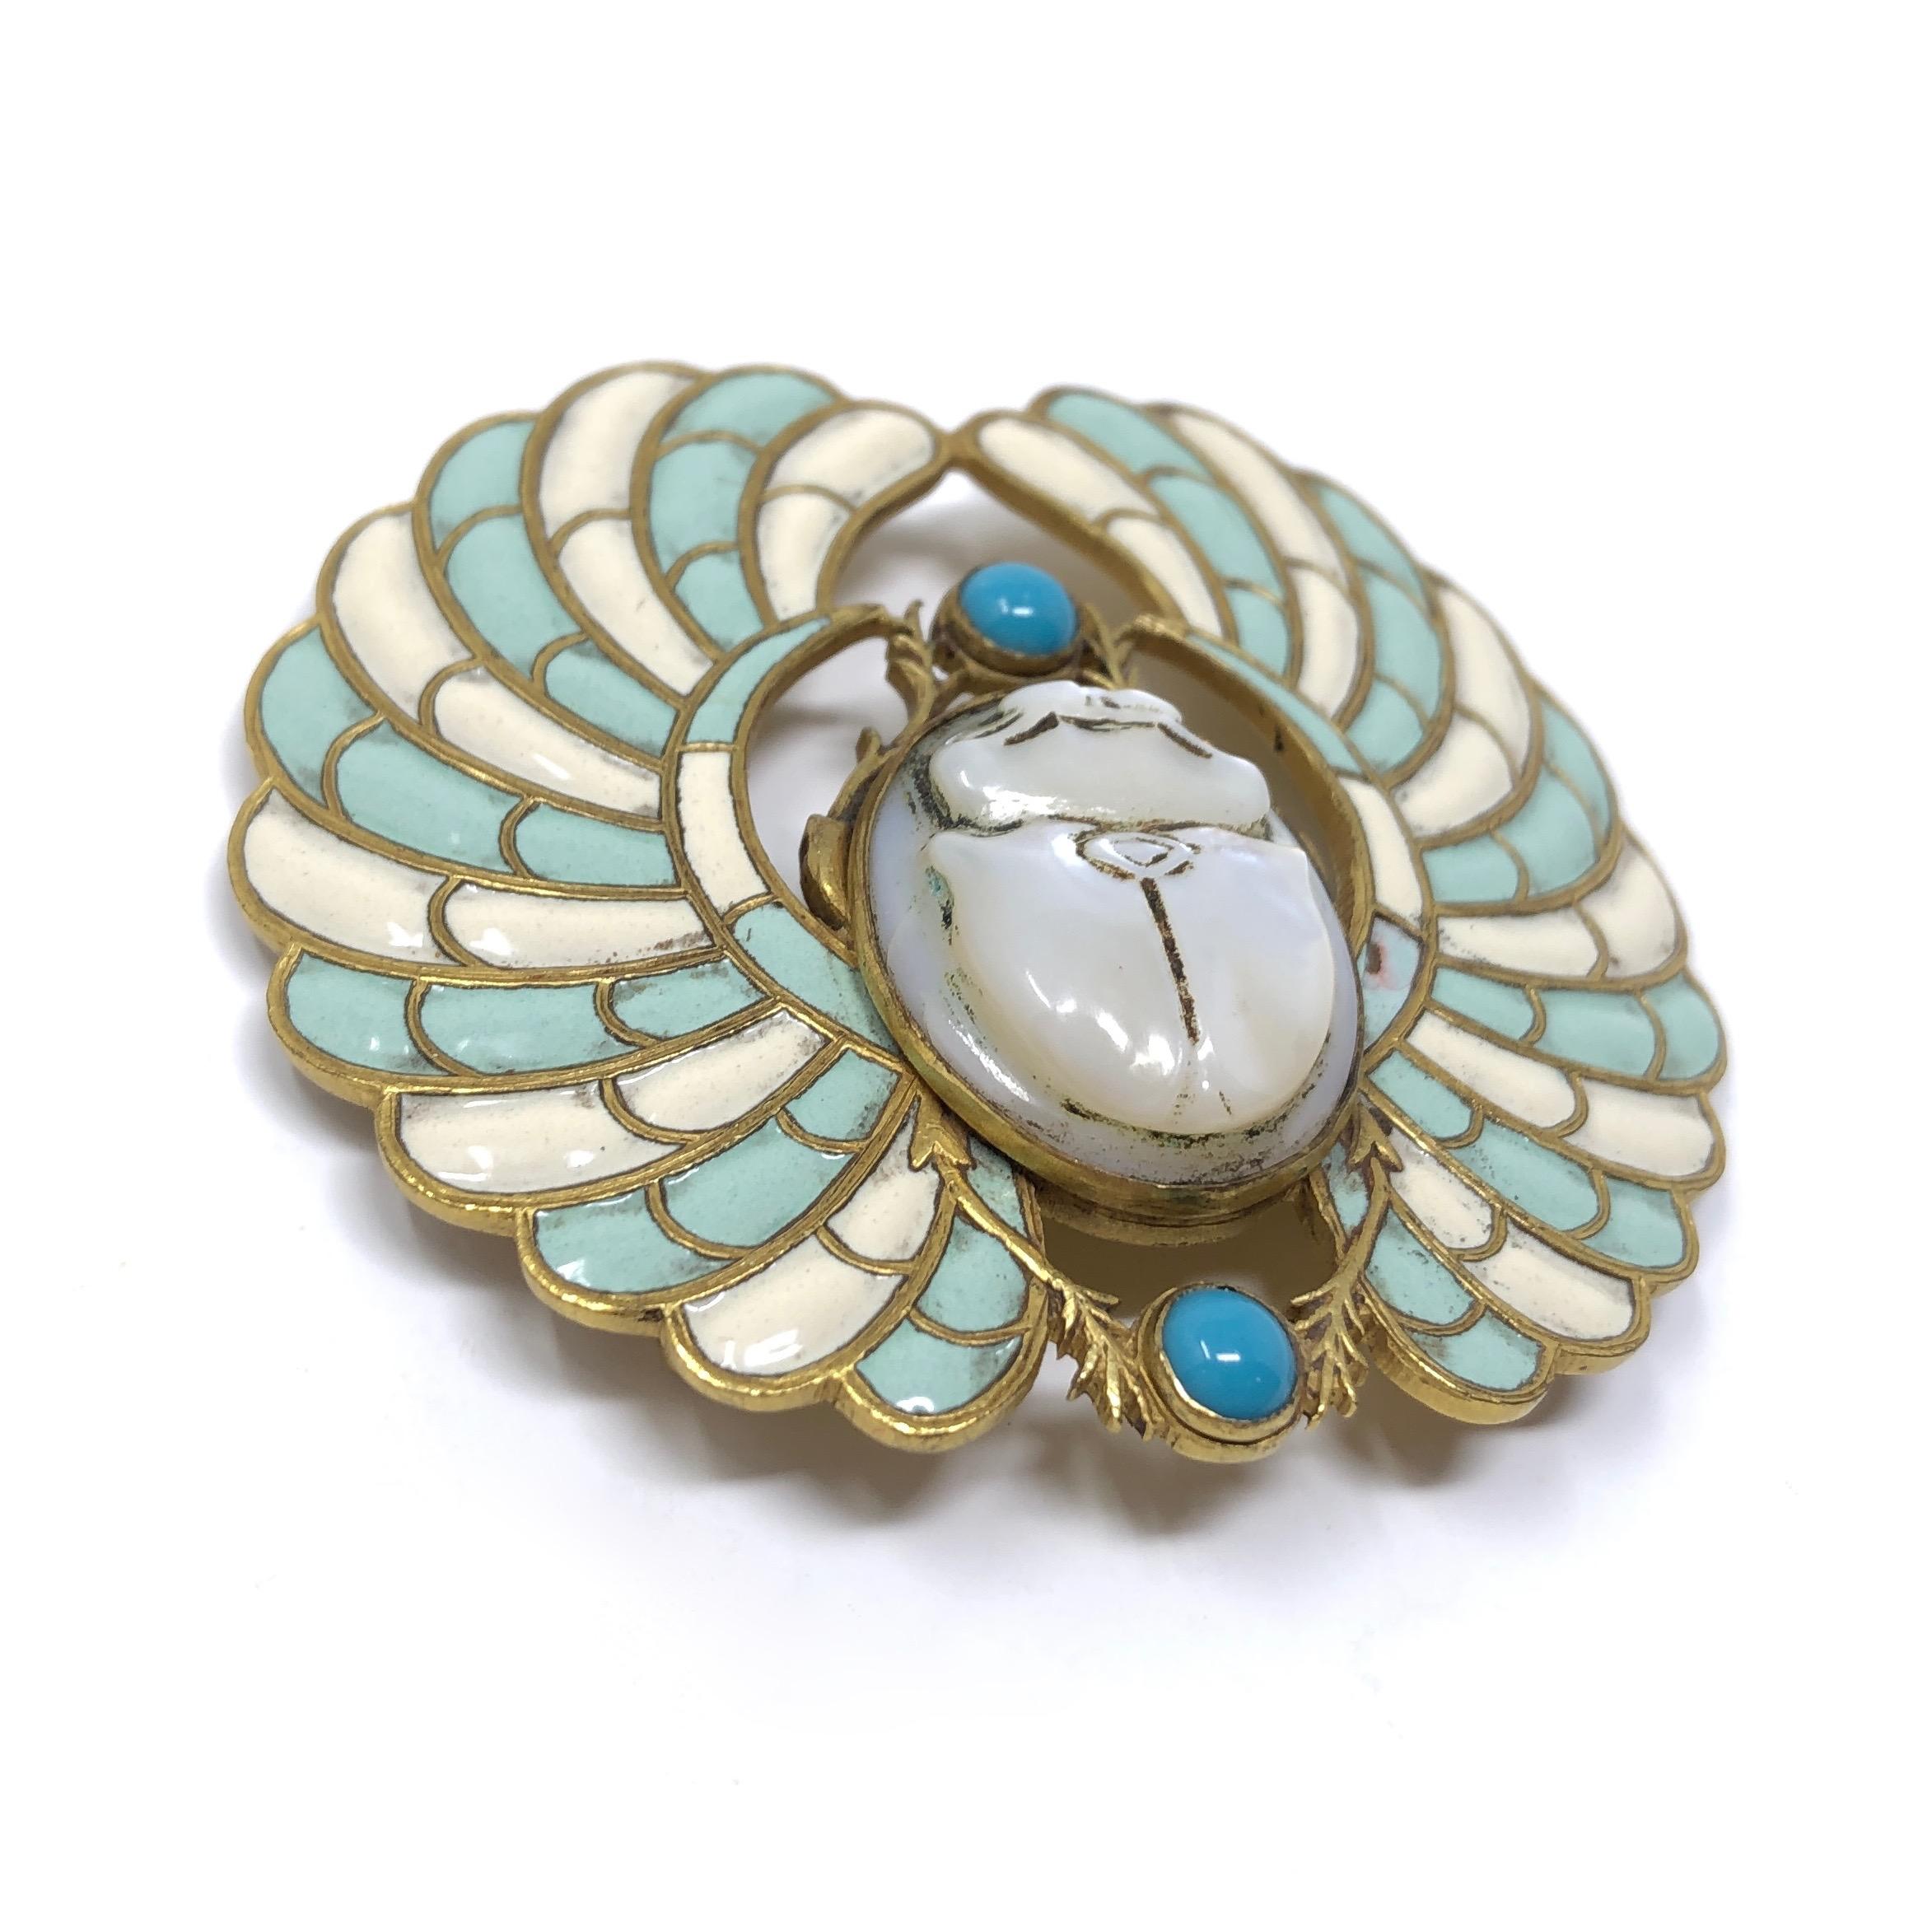 Piel Frères c.1900 Gilt Metal, Enamel and Glass Scarab Design Antique Buckle In Good Condition For Sale In Skelmersdale, GB